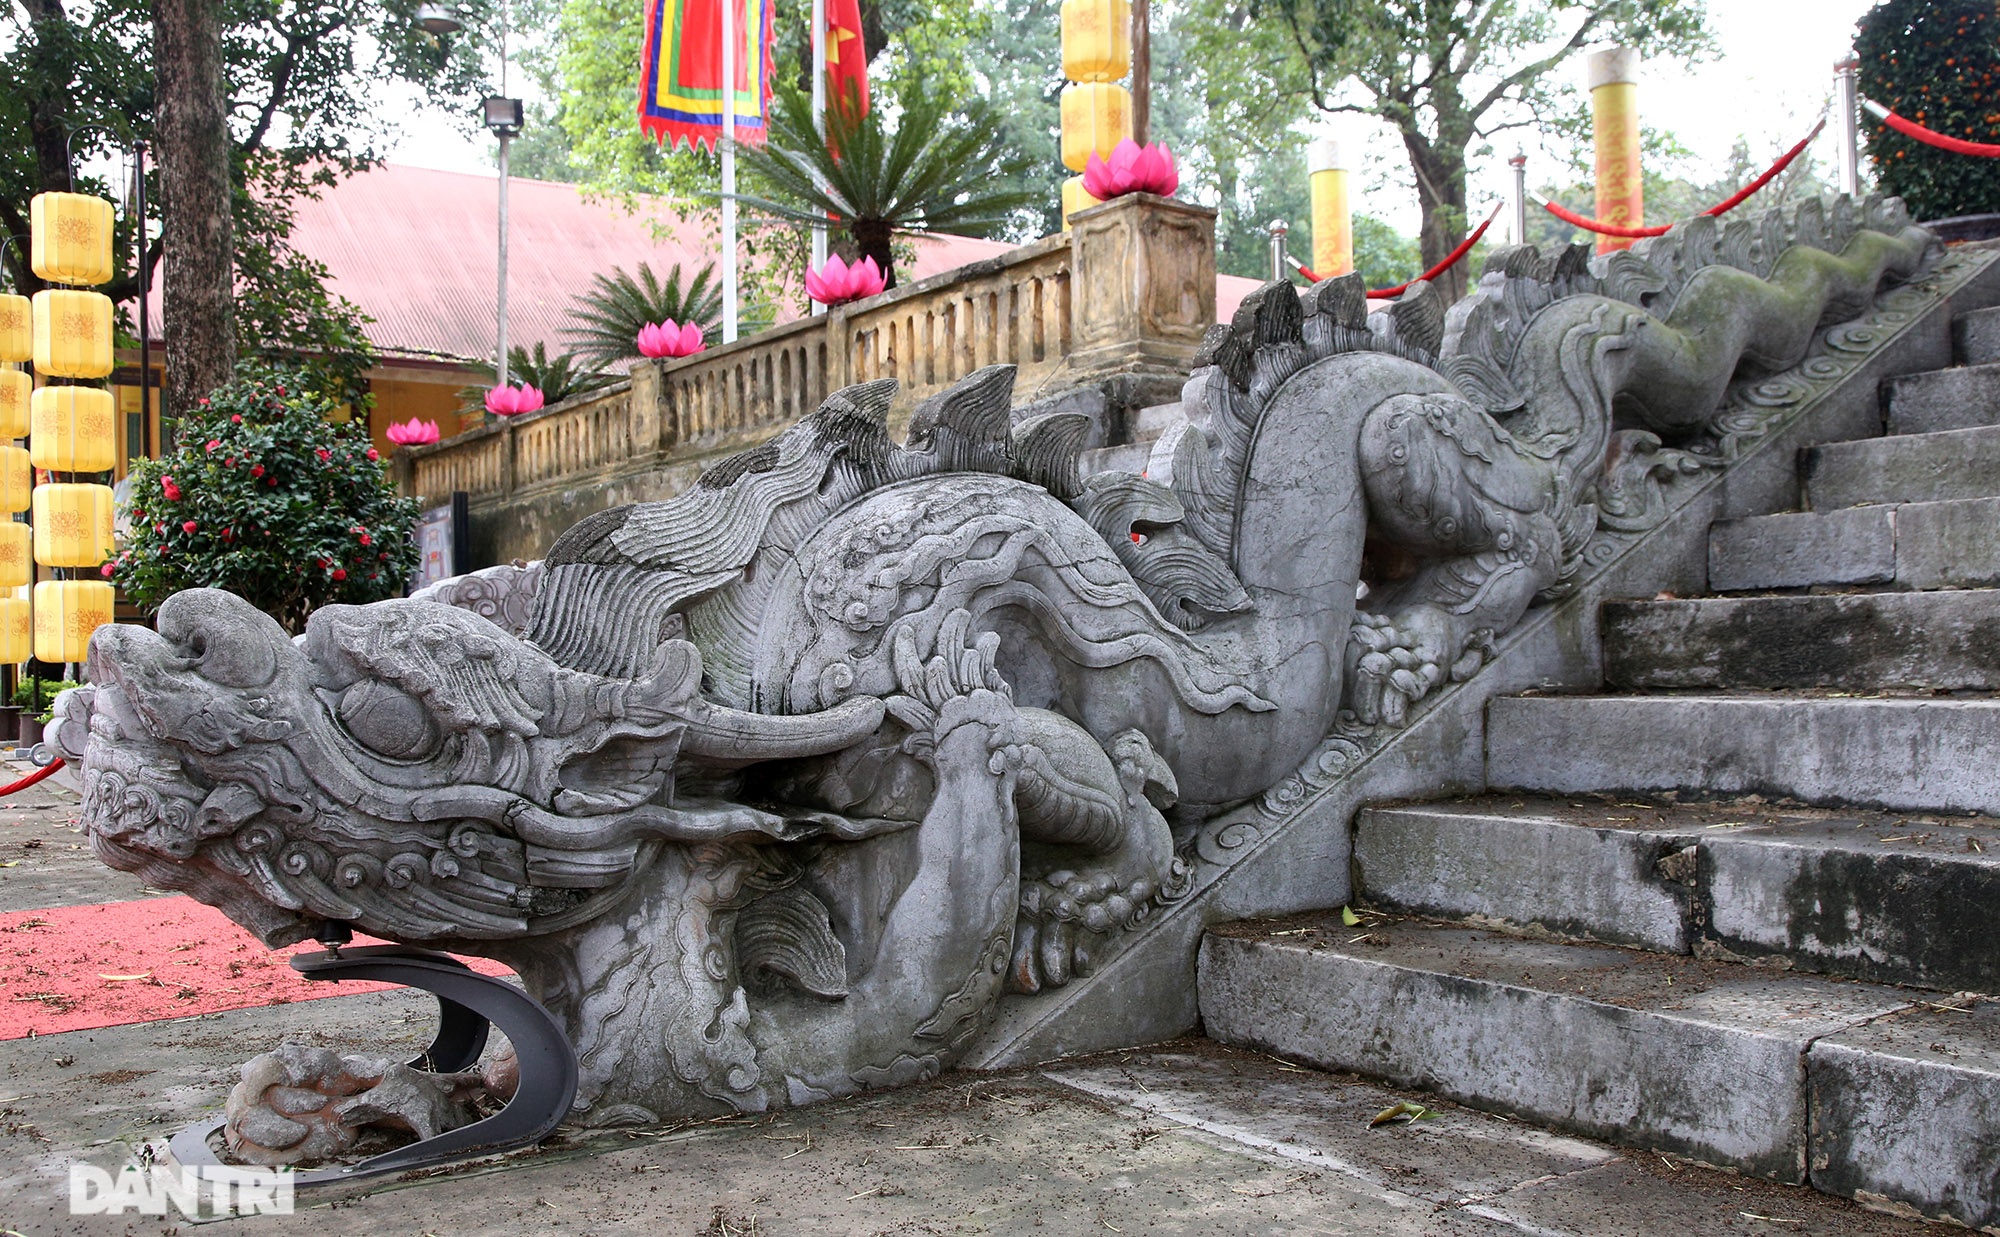 Kinh Thien electric stone steps - a masterpiece of sculptural architecture in the early Le dynasty - 3